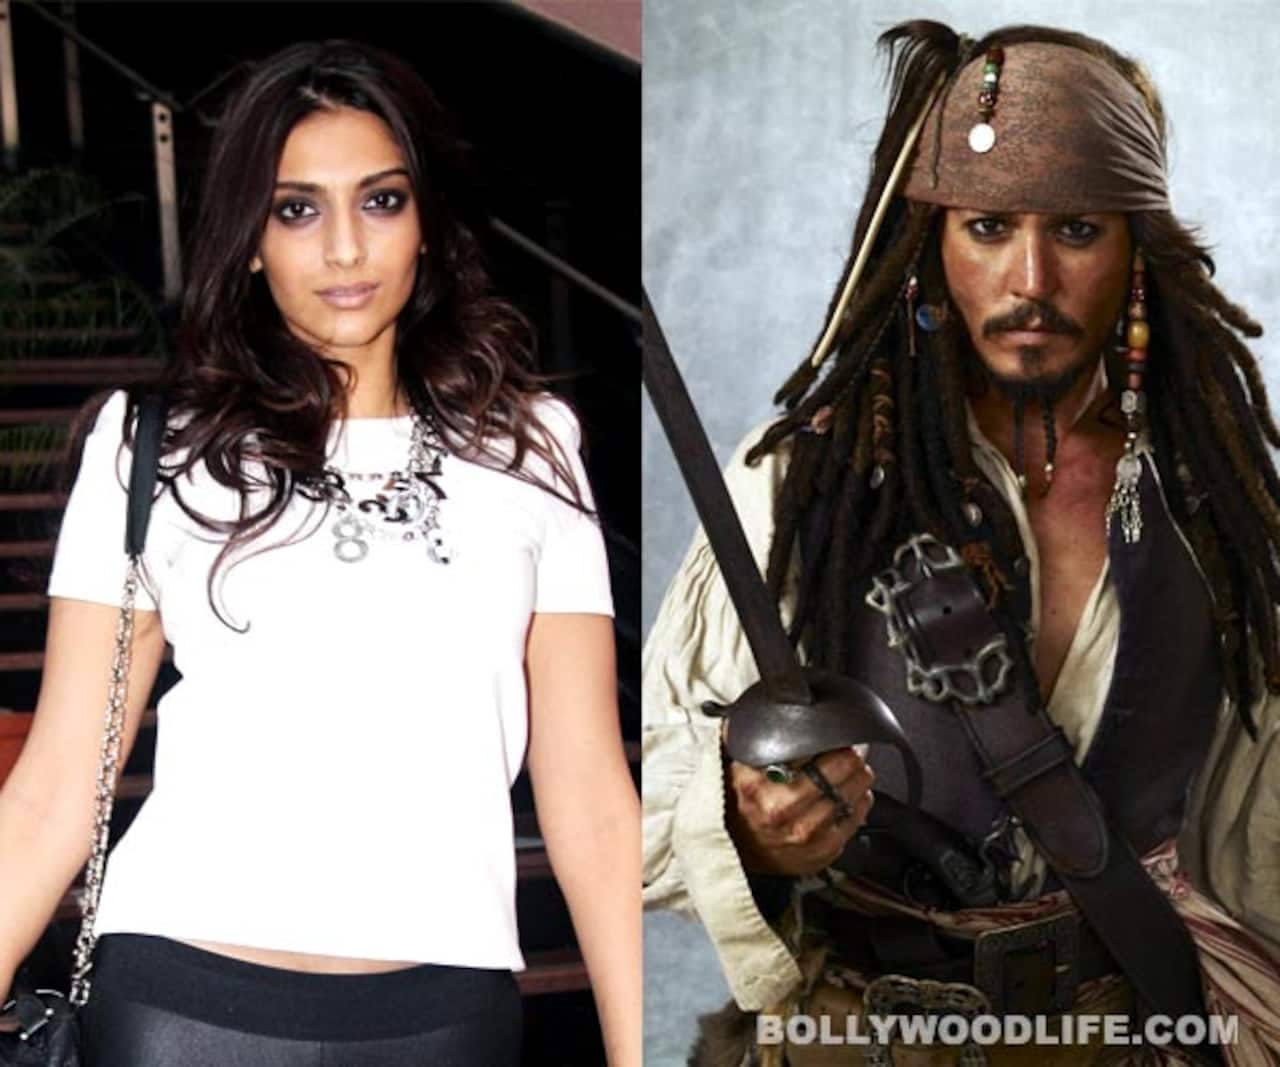 Sonam Kapoor and Johnny Depp in Pirates of the Caribbean 5...really?